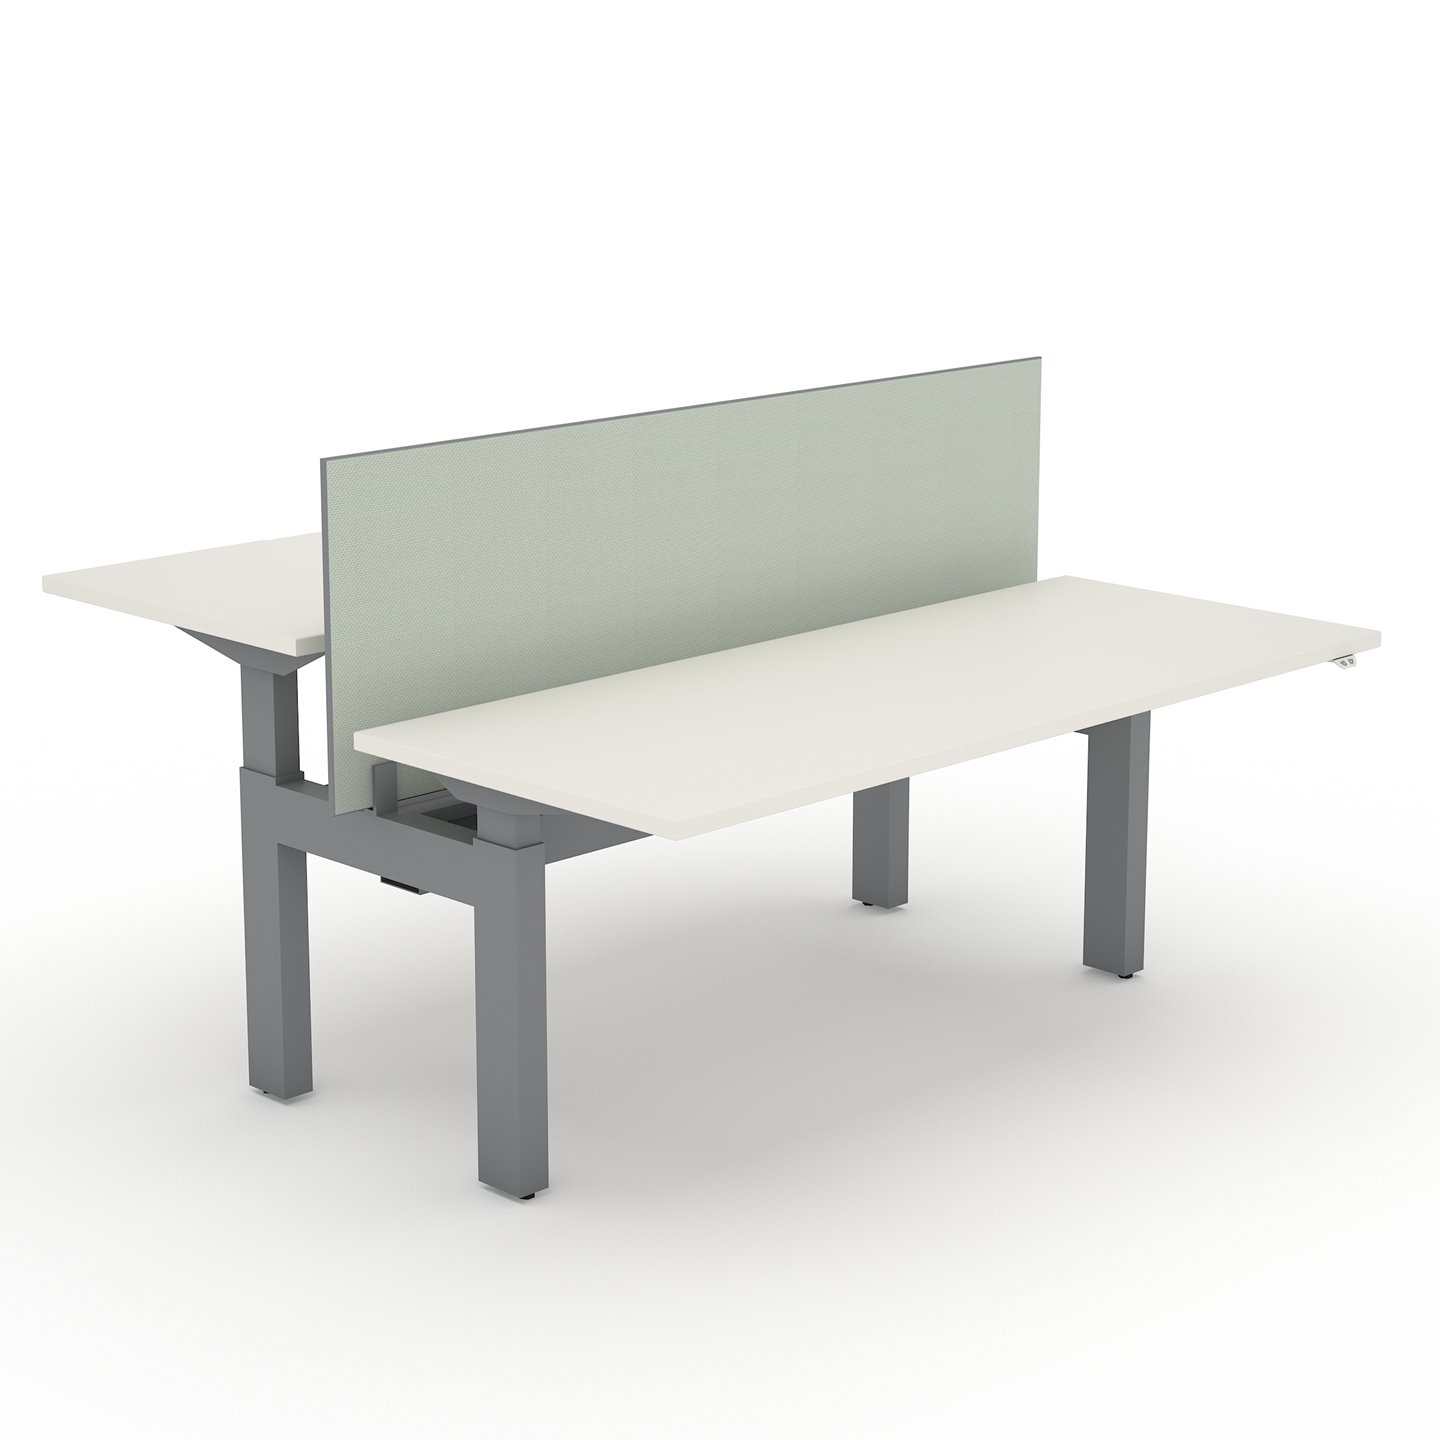 Haworth Planes Value Model Height Adjustable Benching Workspace with 2 white height adjustable desk and one is raised and a grey divider between them